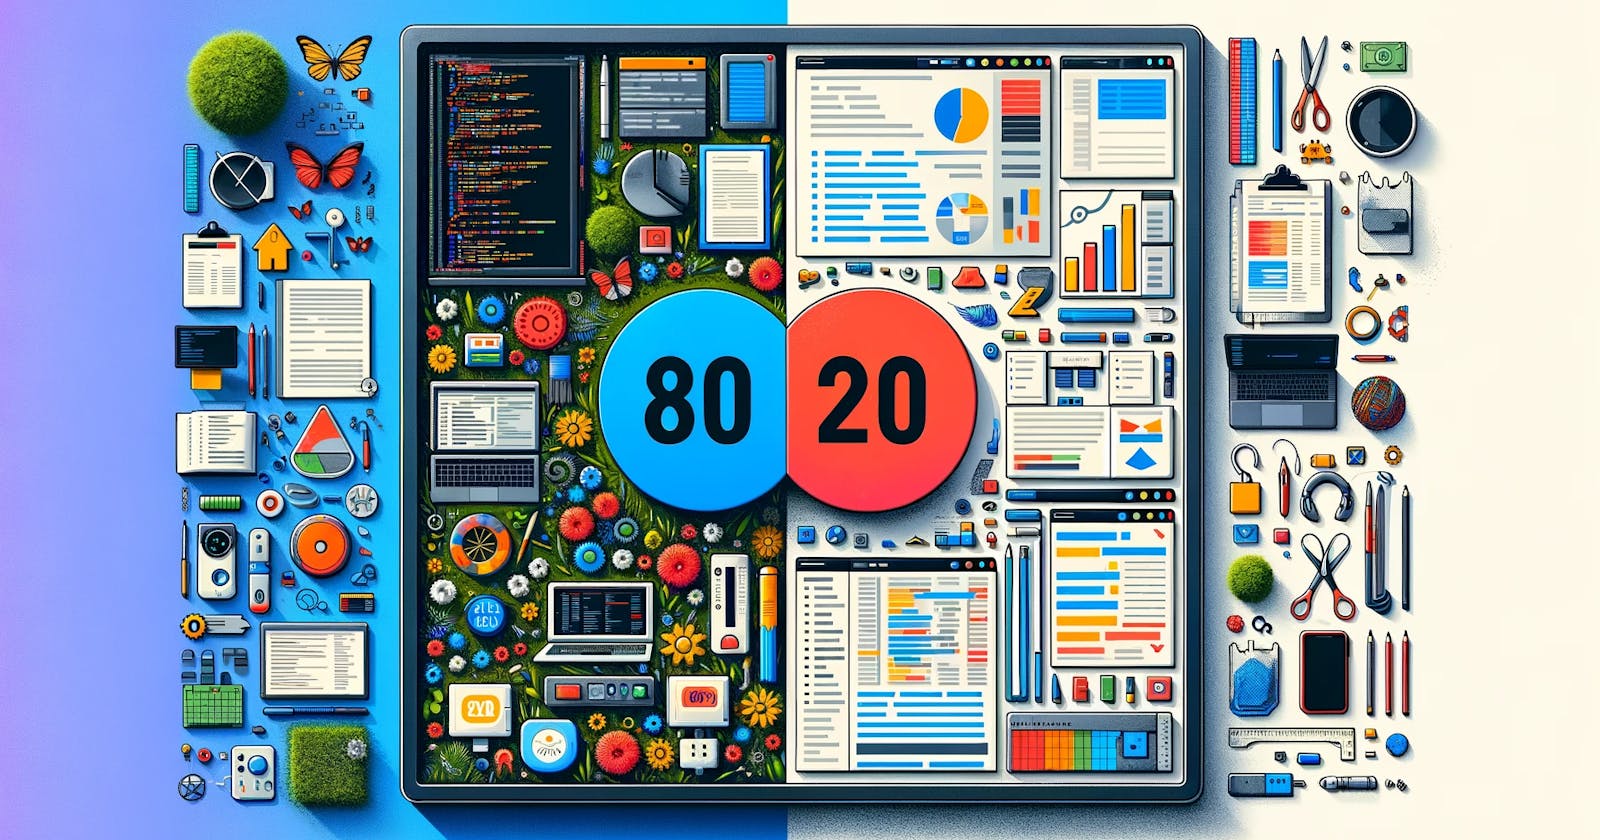 How the 80/20 Rule Can Make You a Better Developer